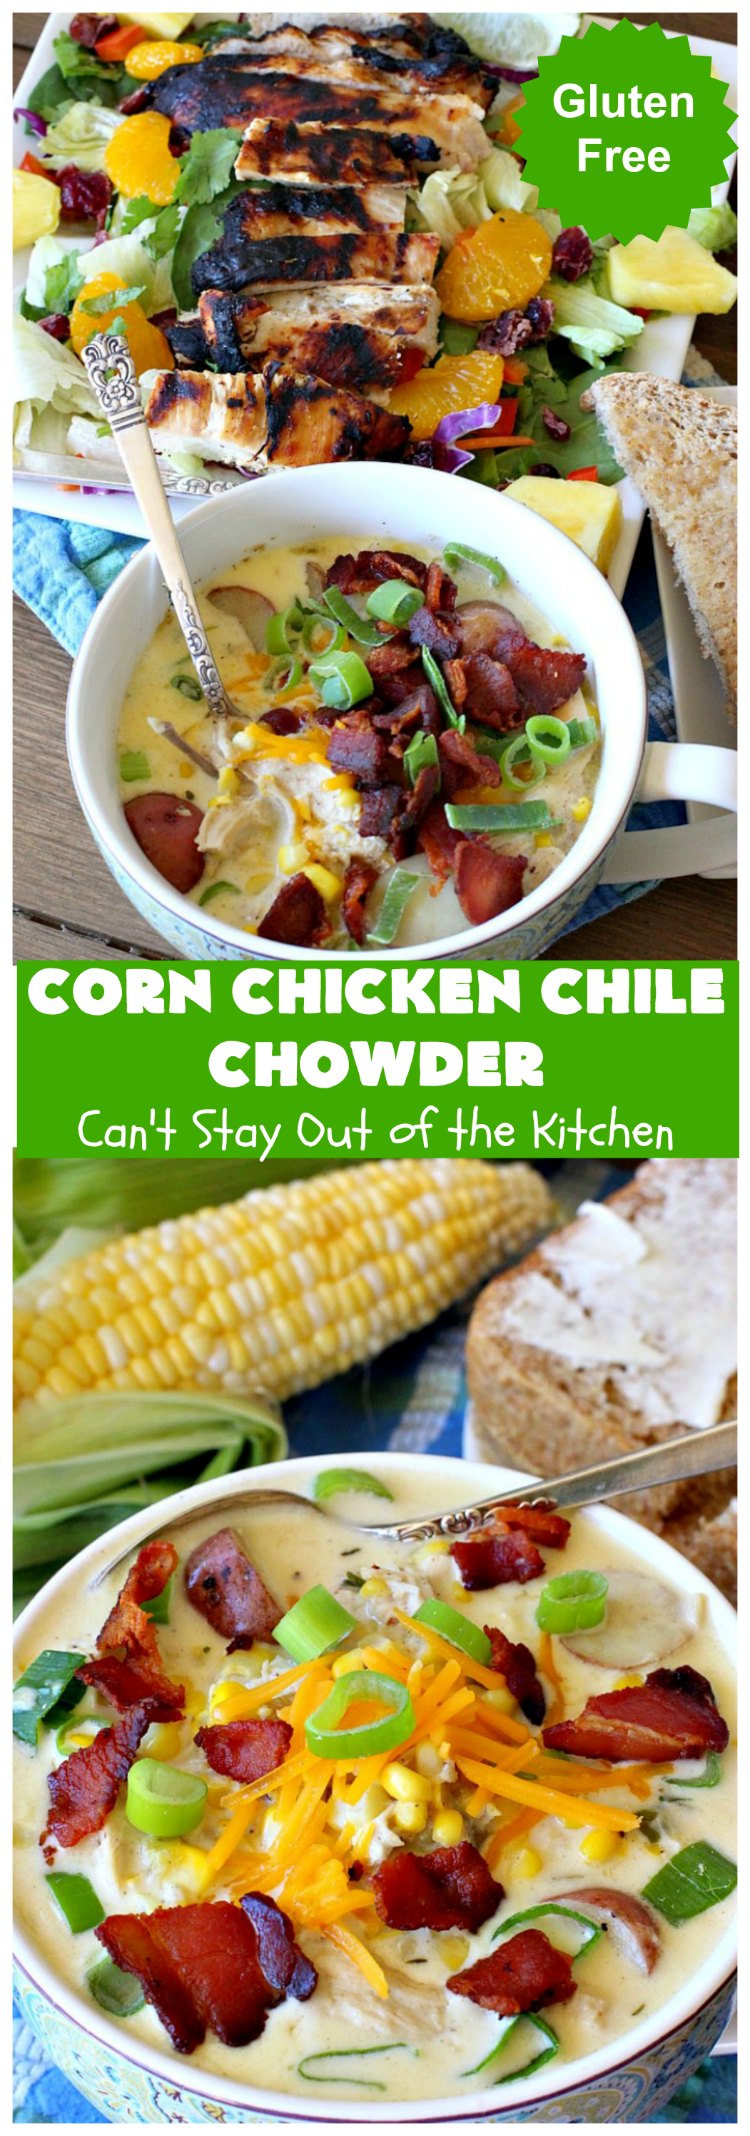 Corn Chicken Chile Chowder | Can't Stay Out of the Kitchen | this fantastic #TexMex #soup is hearty, satisfying & so filling. It's filled with Southwestern flavors that give it zest, but it's not overpowering. #corn #chicken #chowder #GreenChilies #CornChowder #GlutenFree #CornChickenChileChowder